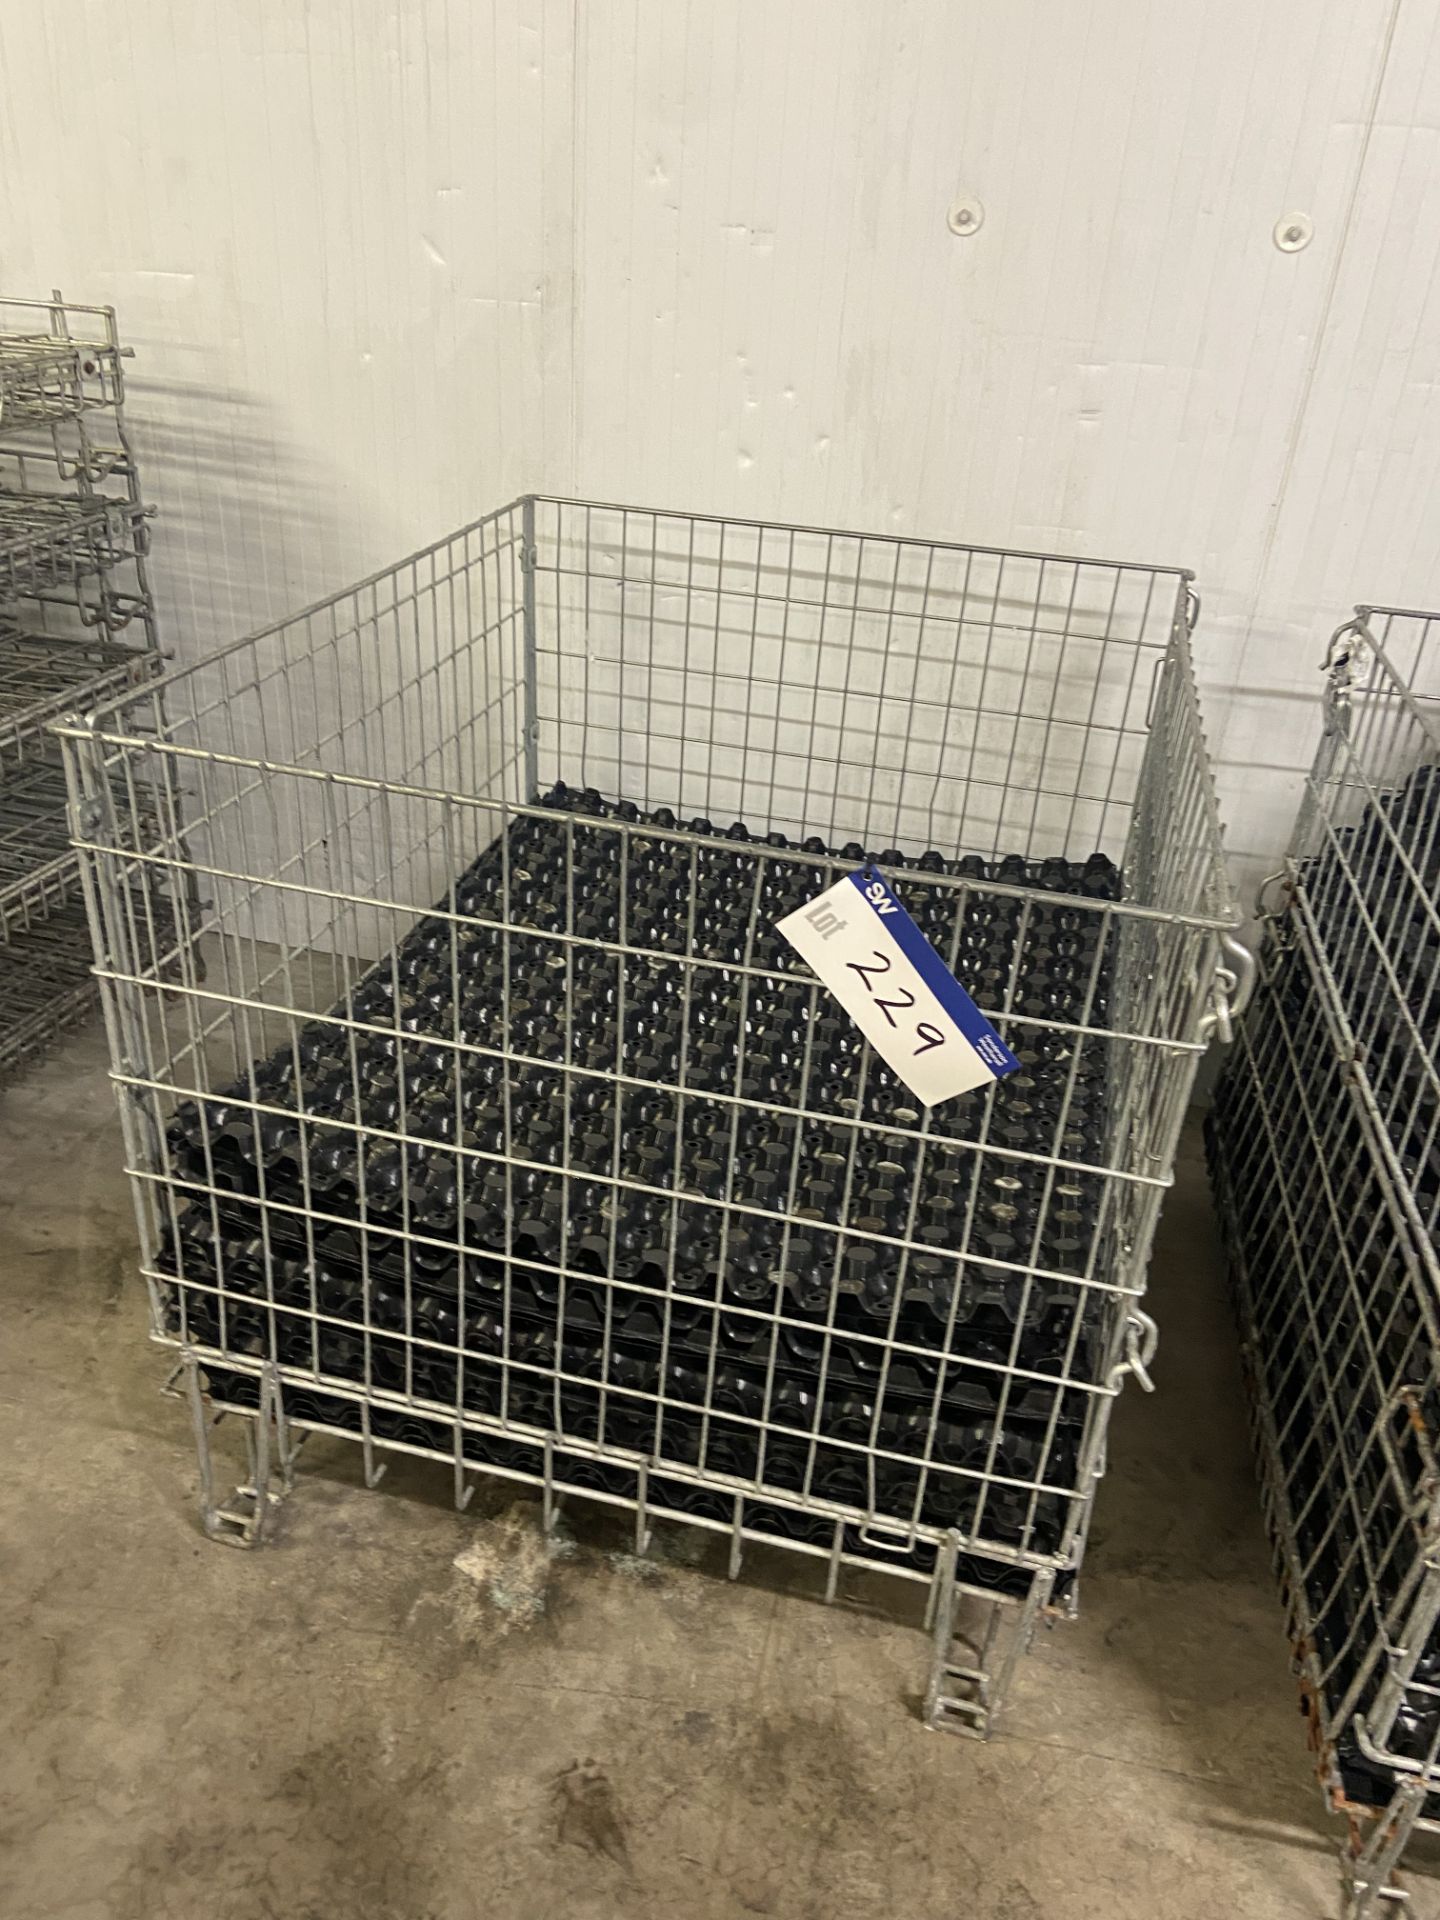 Galvanised Steel Collapsible Cage Box Pallet, approx. 1.2m x 1m x approx. 800mm deep, with plastic